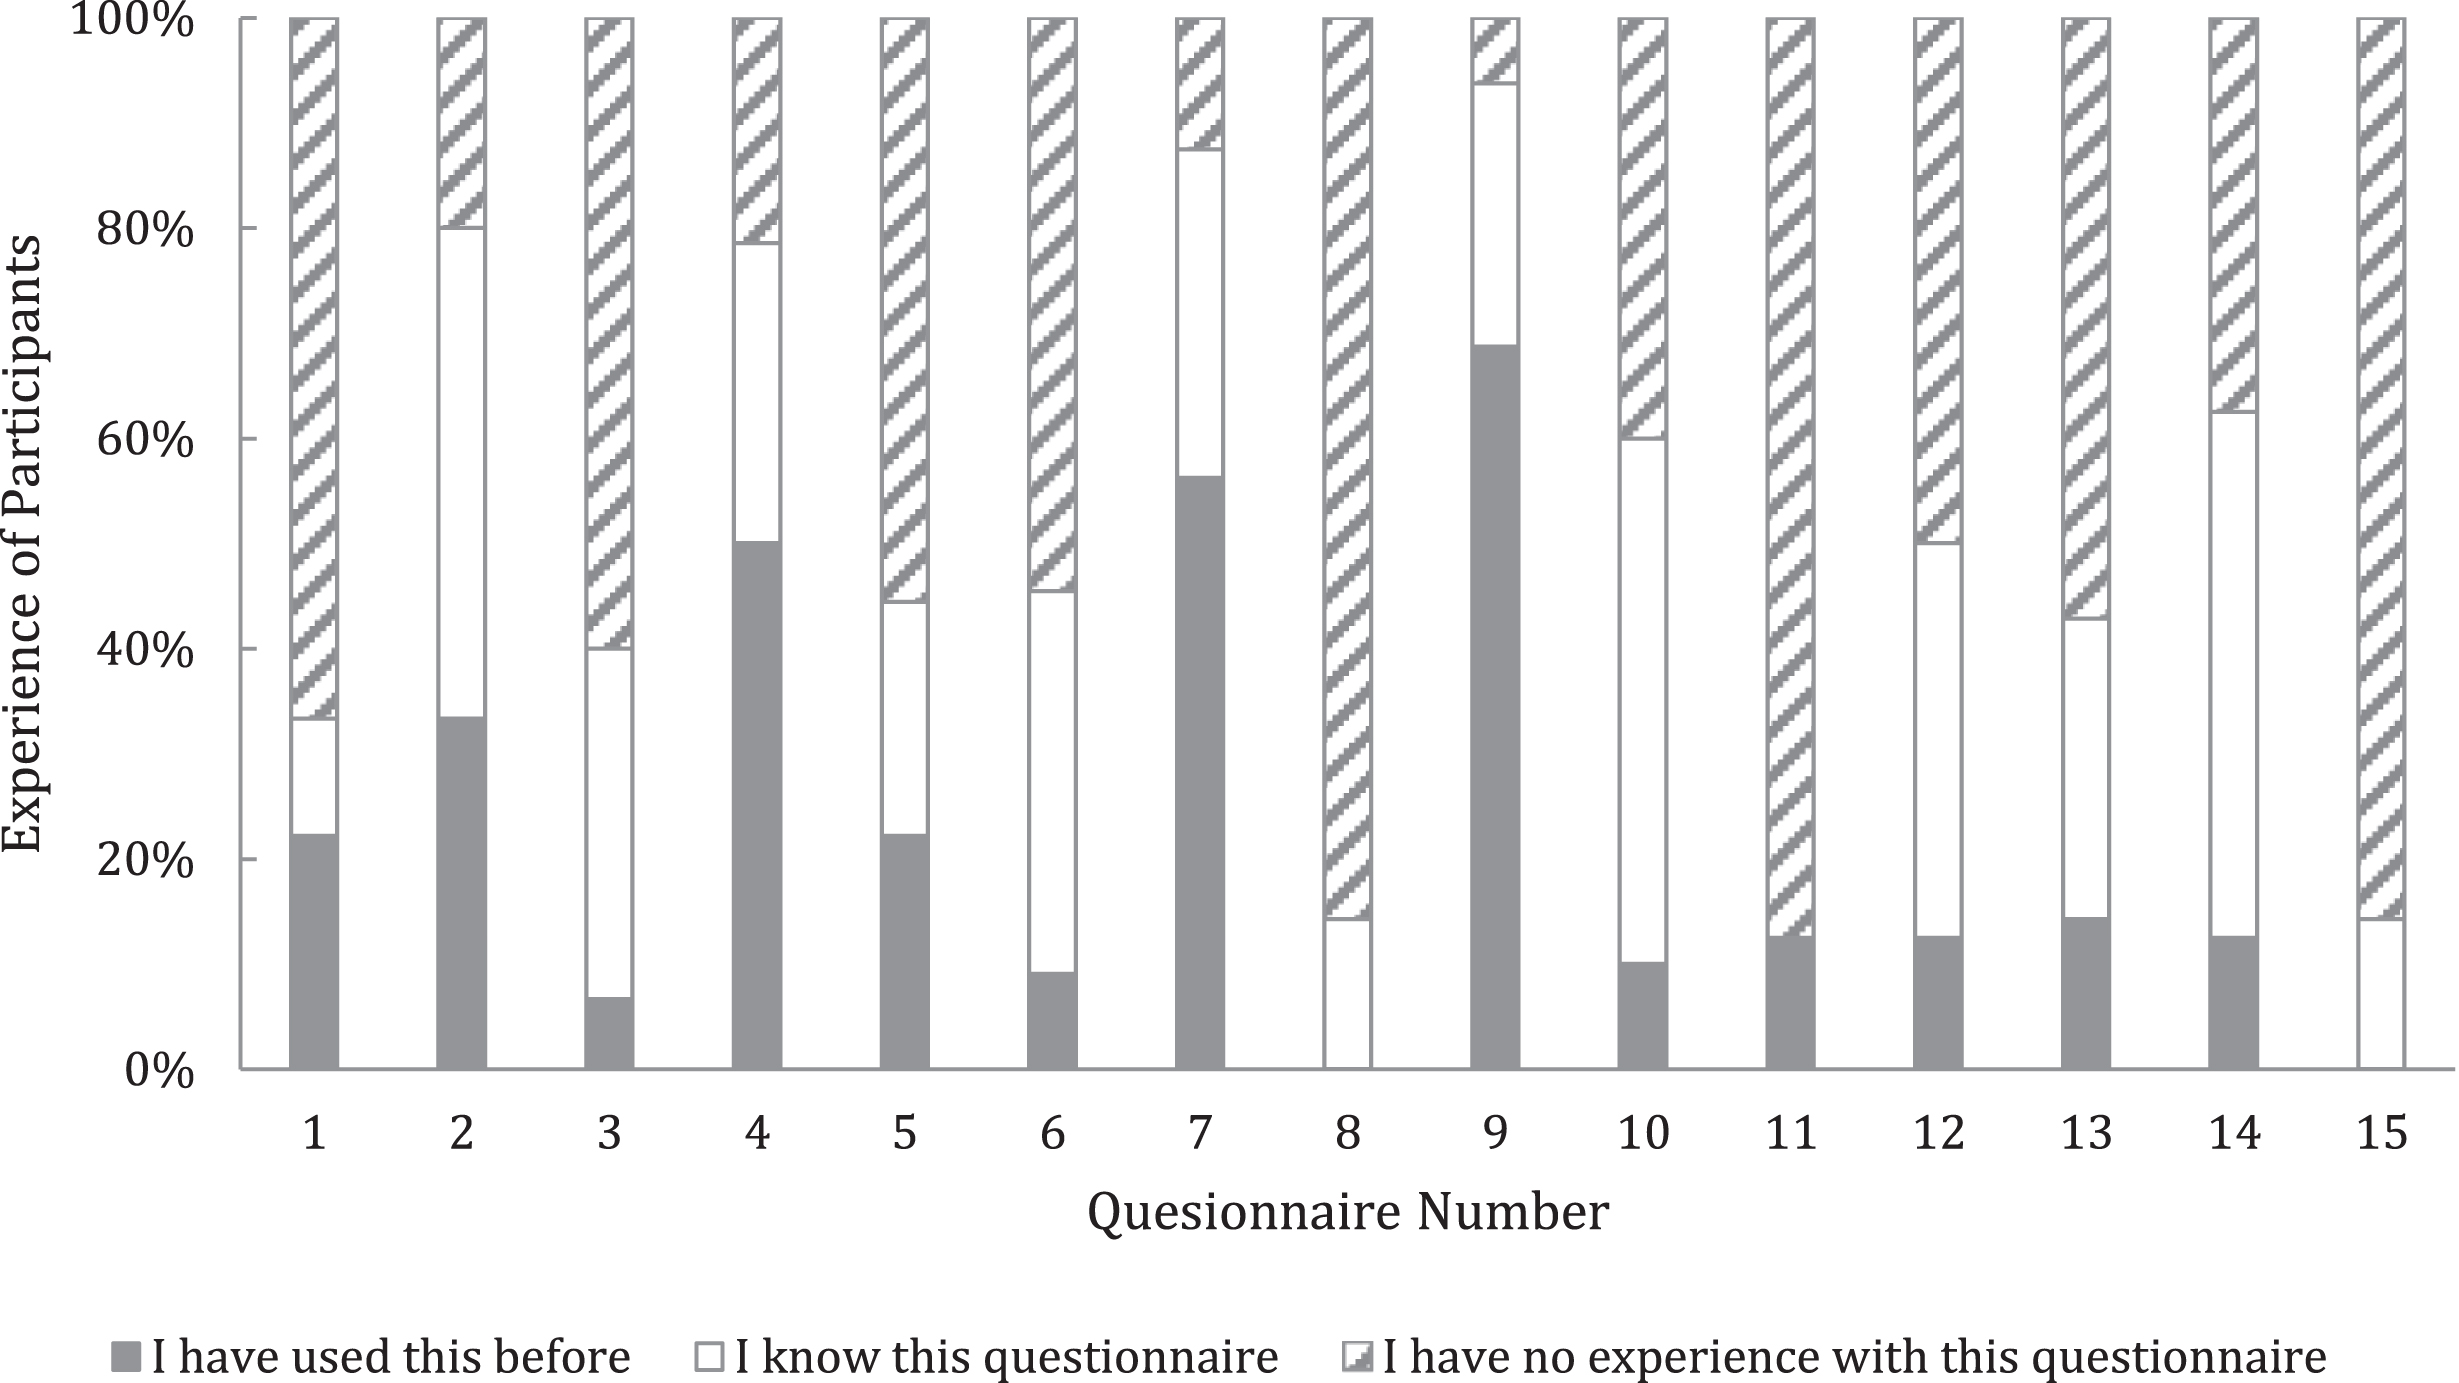 Experience of participants in using the questionnaires.